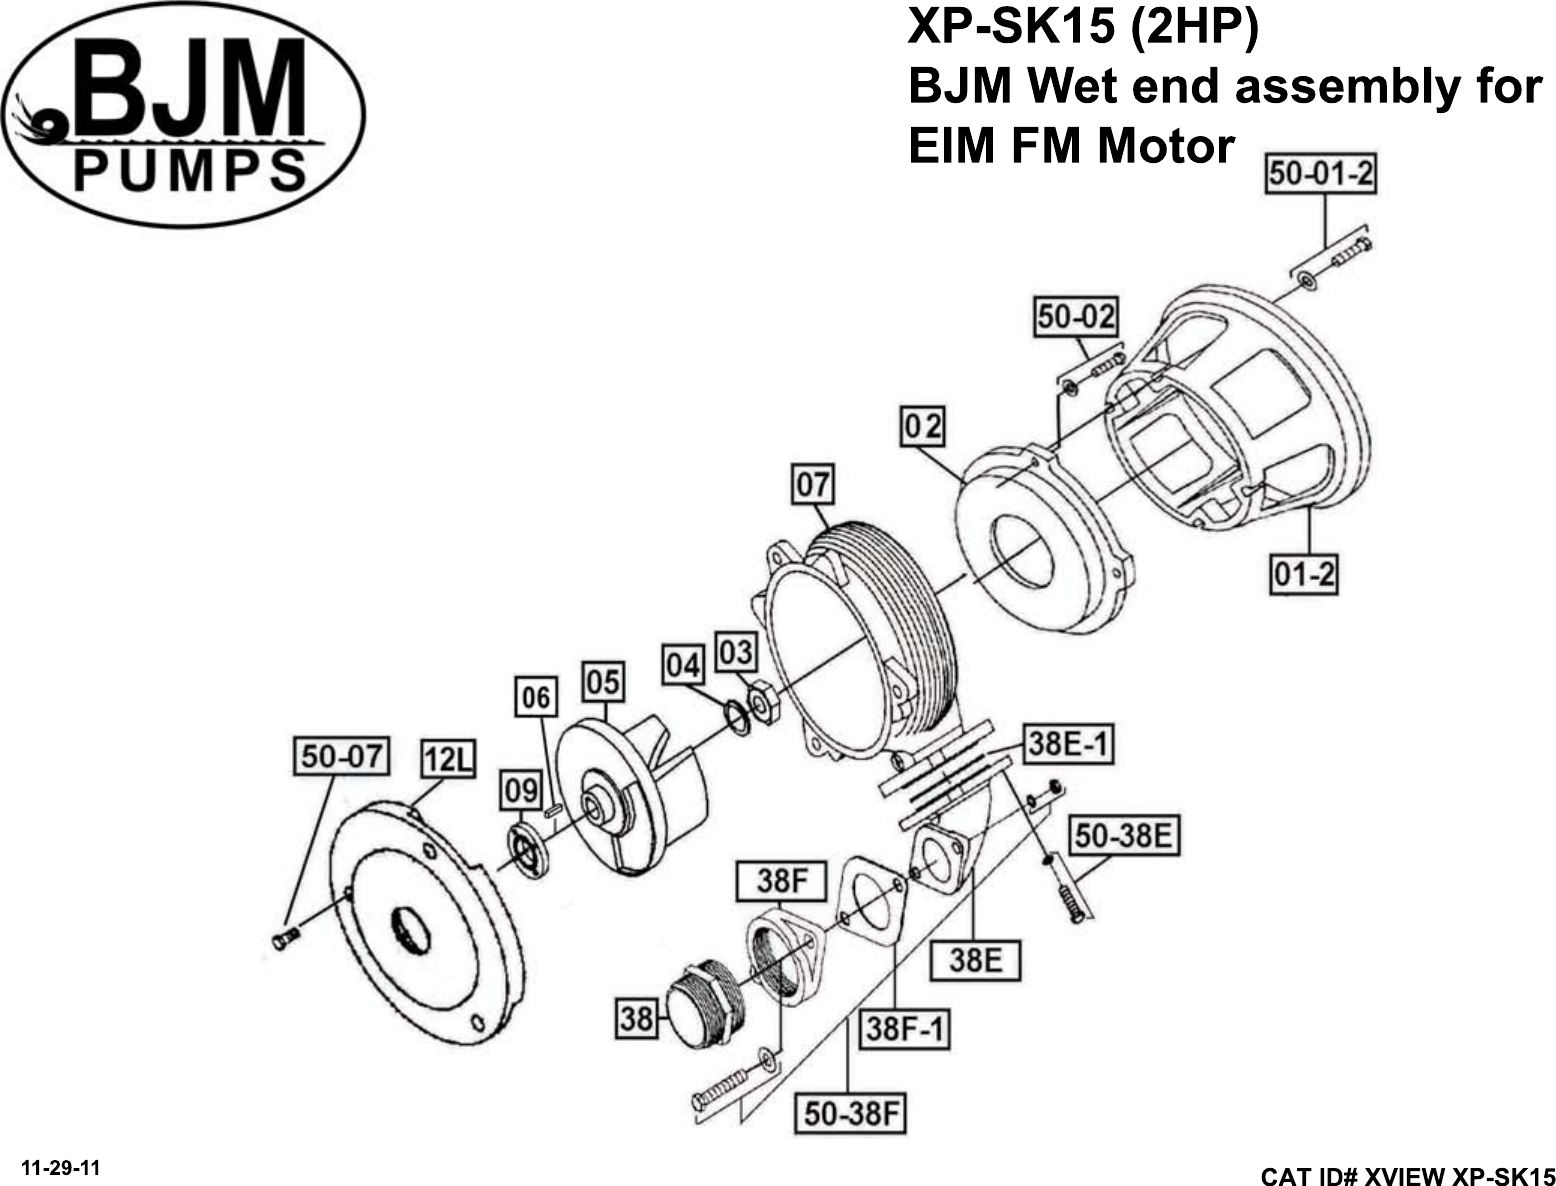 Page 1 of 4 - 136506 6 Bjm Xp-Sk Series Exploded View SK-XView-SK08C-SK15C 04-29-04.bmp User Manual